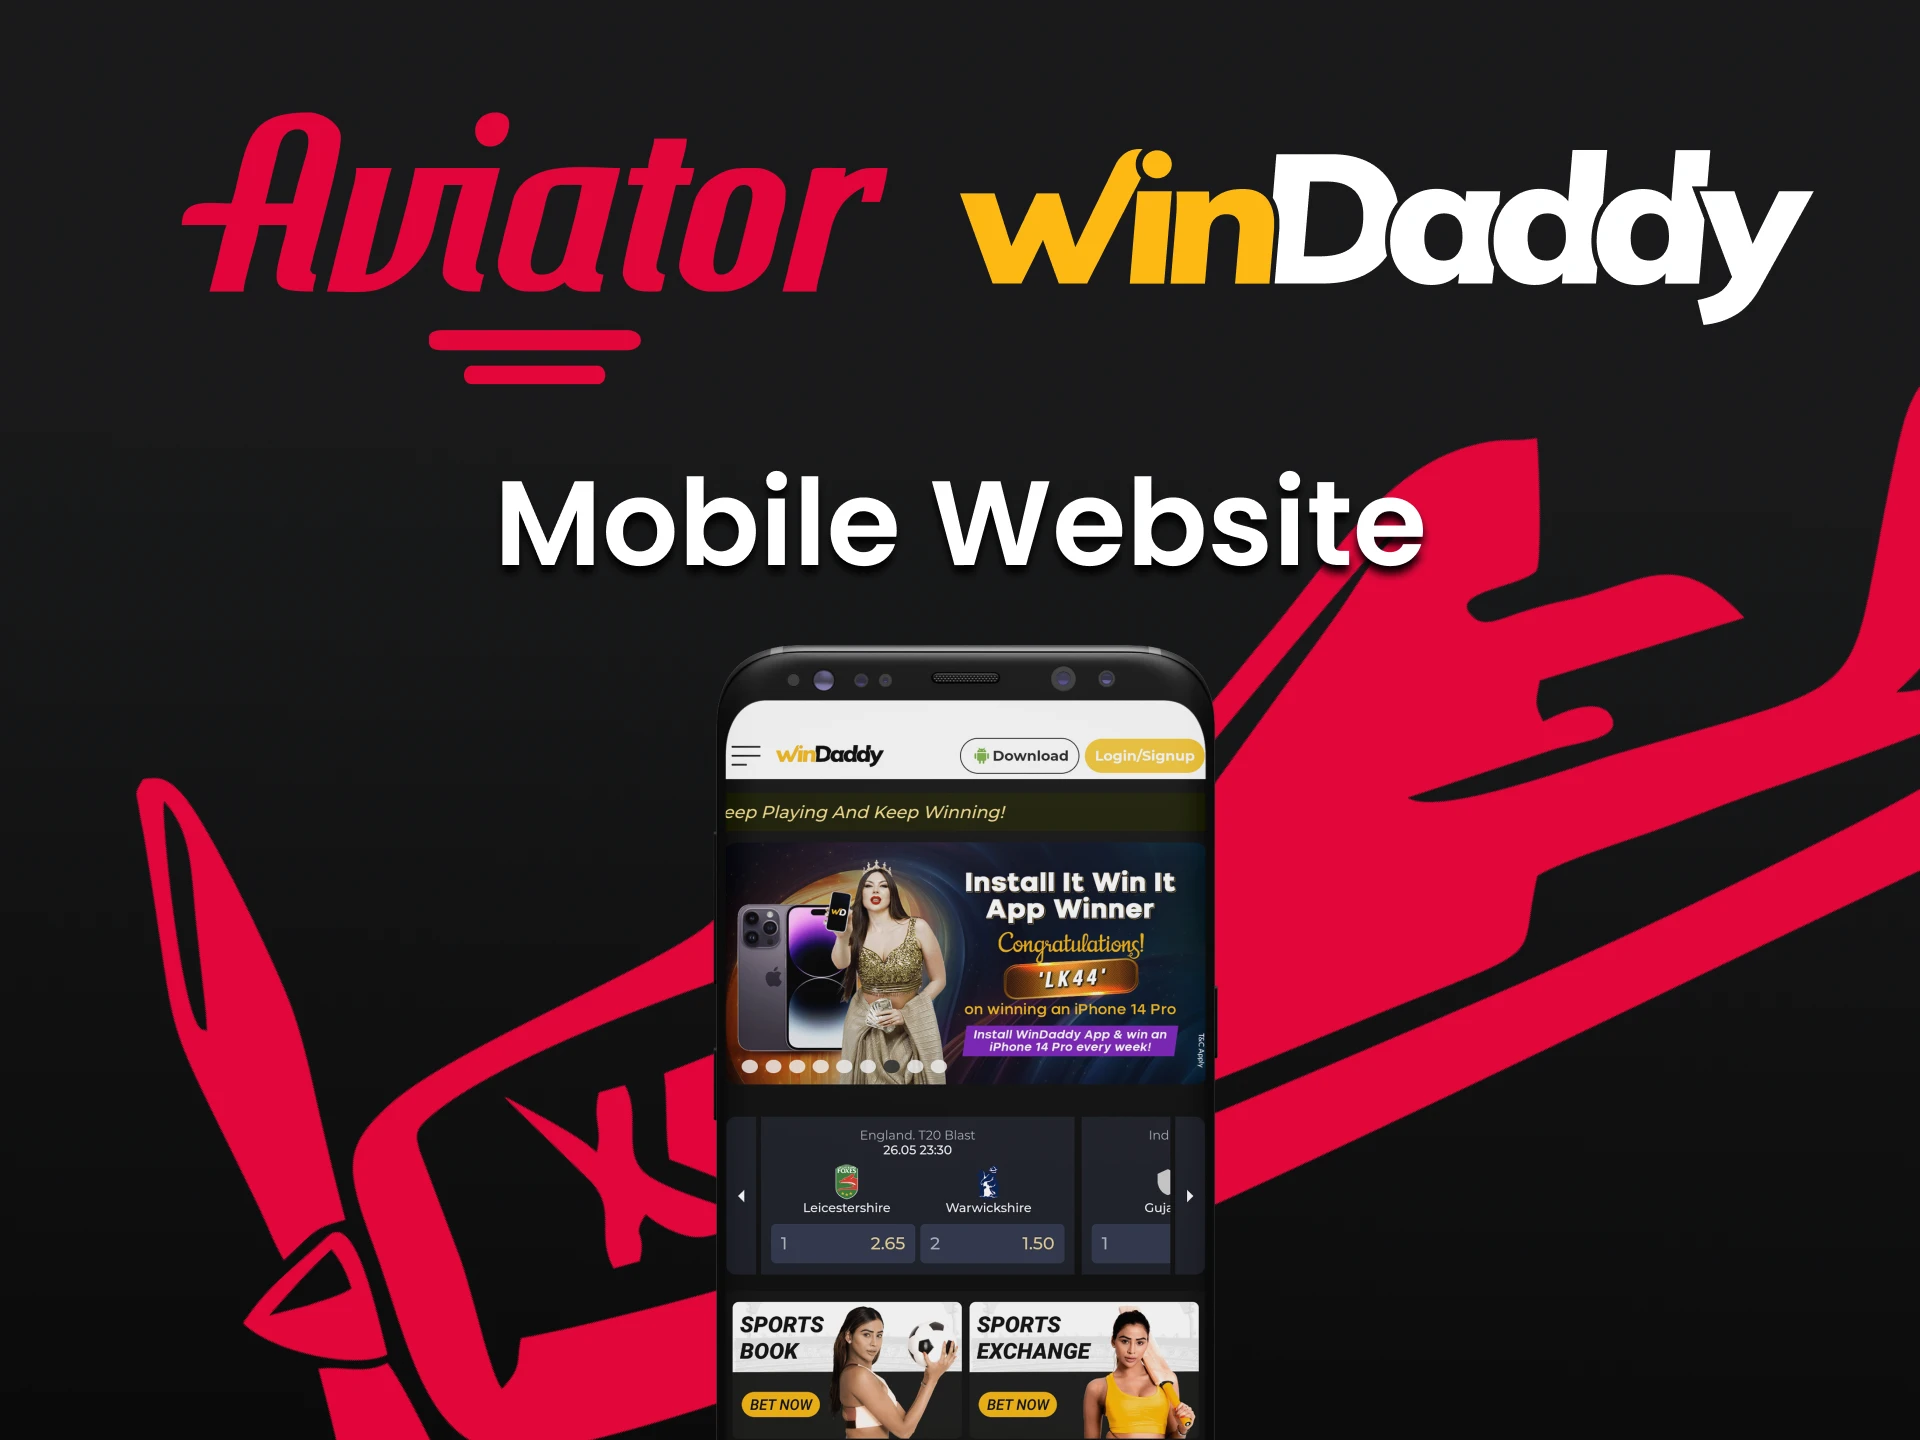 Visit the mobile version of the WinDaddy website.